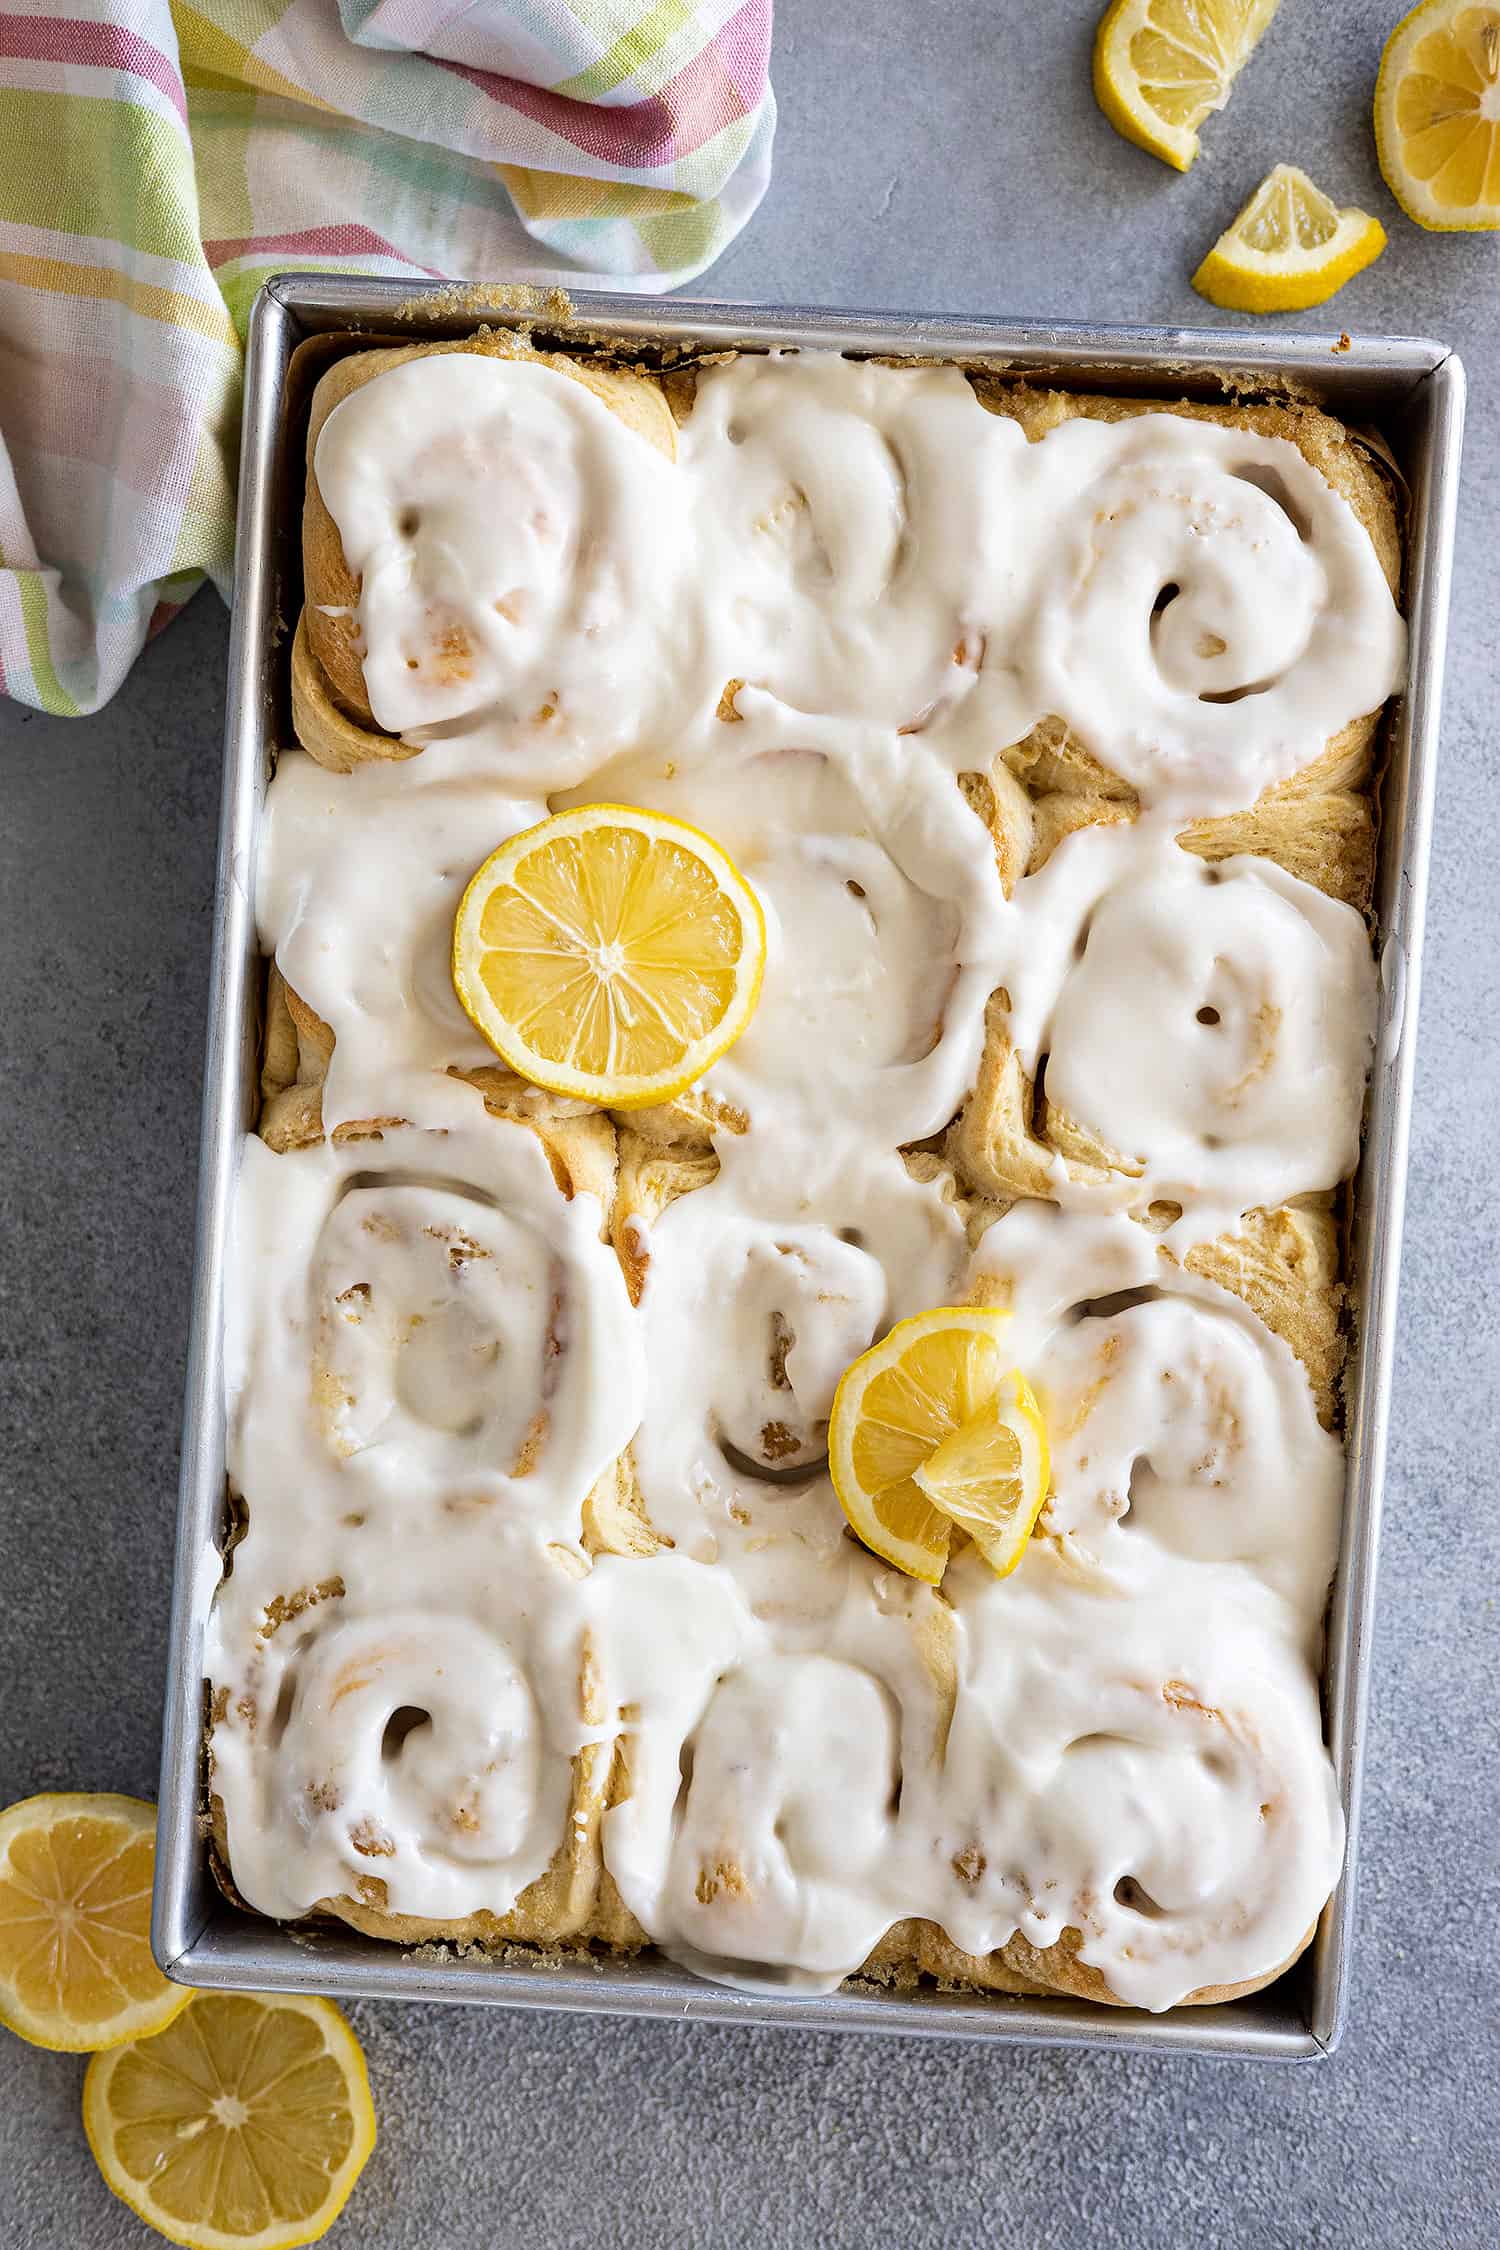 Overhead view of a pan of lemon sweet rolls topped with a cream cheese frosting and garnished with a few lemon slices. 